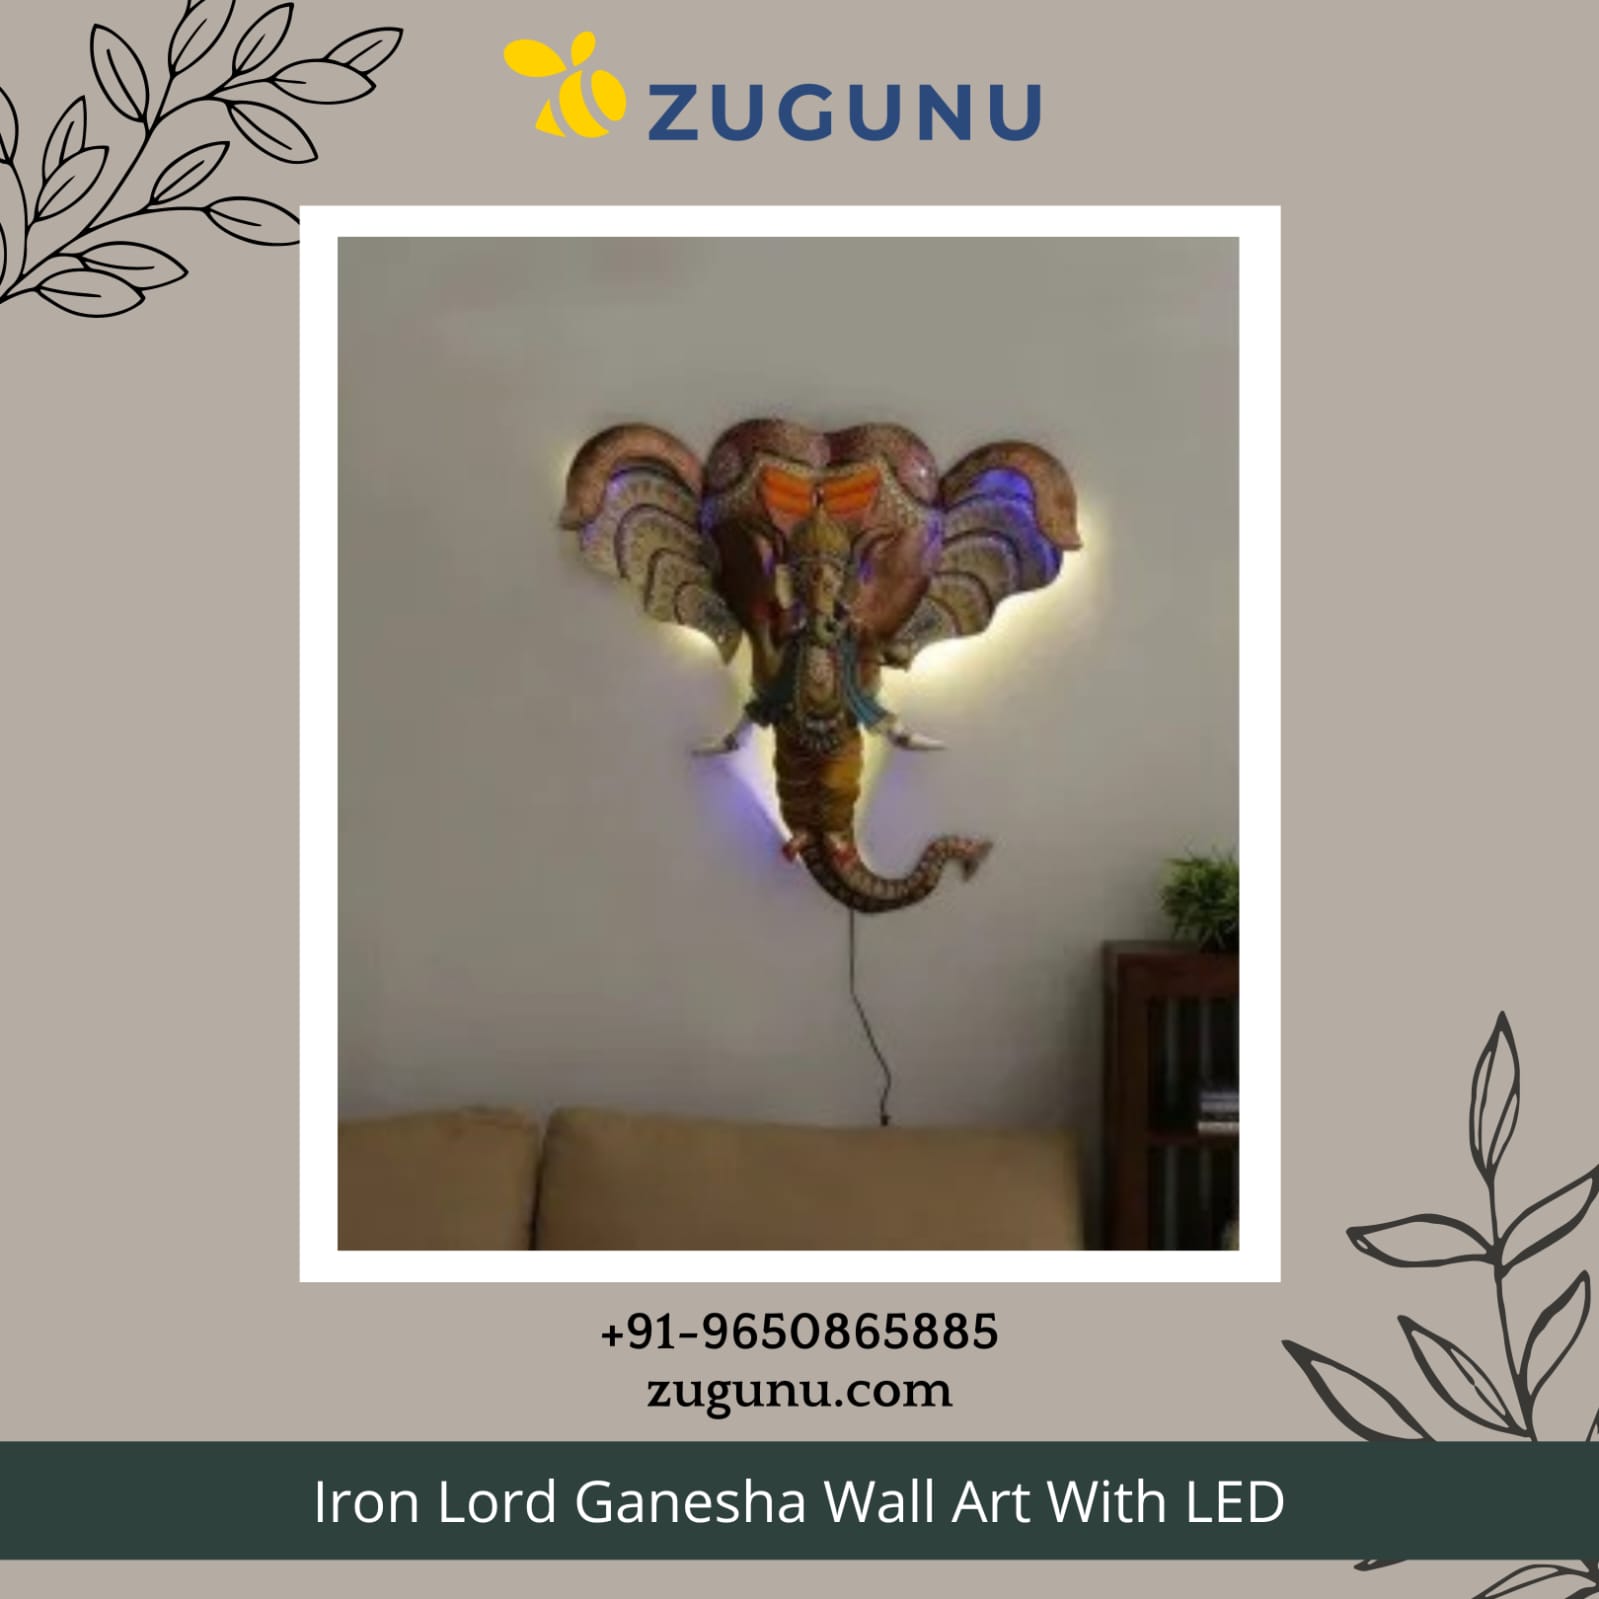 Buy From Top Wall Art With LED Selling Online